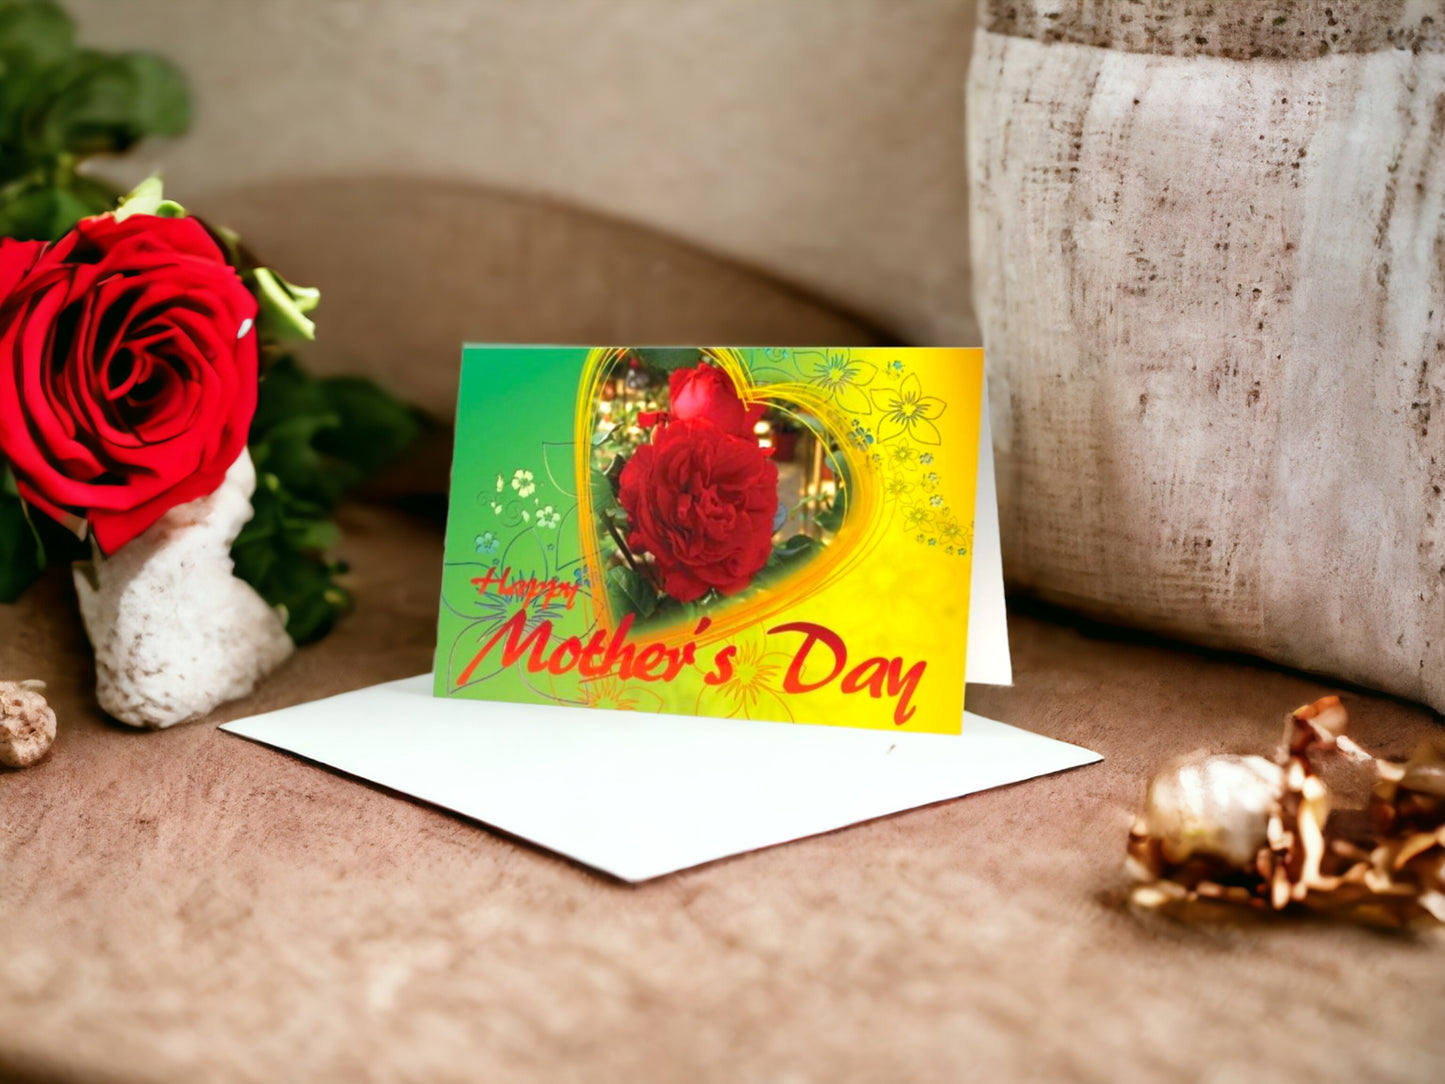 Happy Mother's Day Card #1